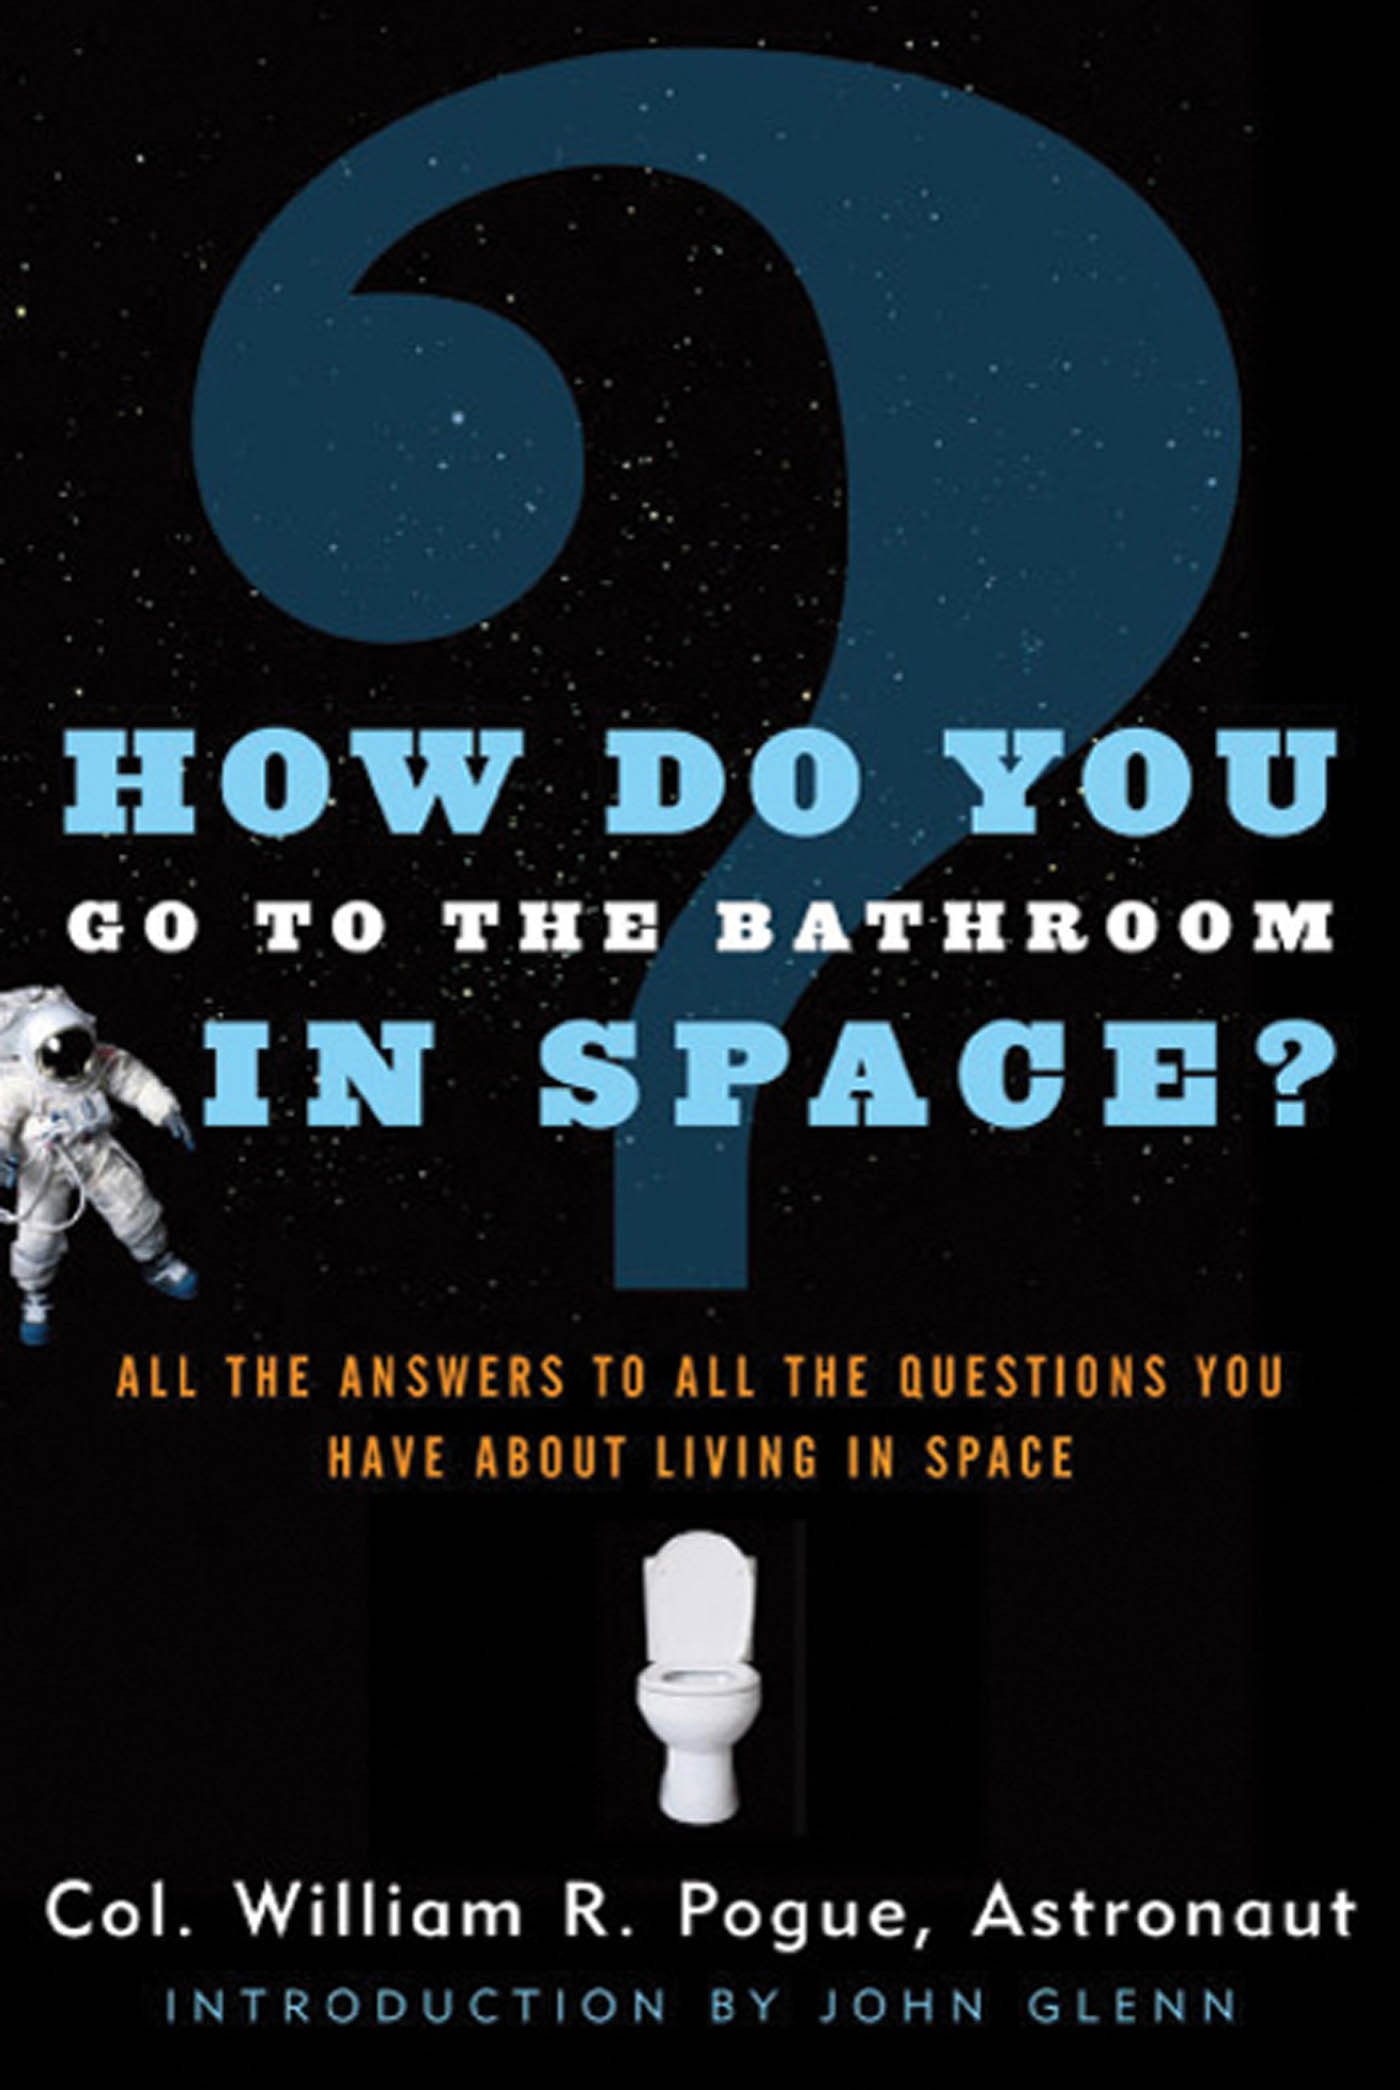 How Do You Go To The Bathroom In Space? : All the Answers to All the Questions You Have About Living in Space by Col. William R. Pogue, John Glenn